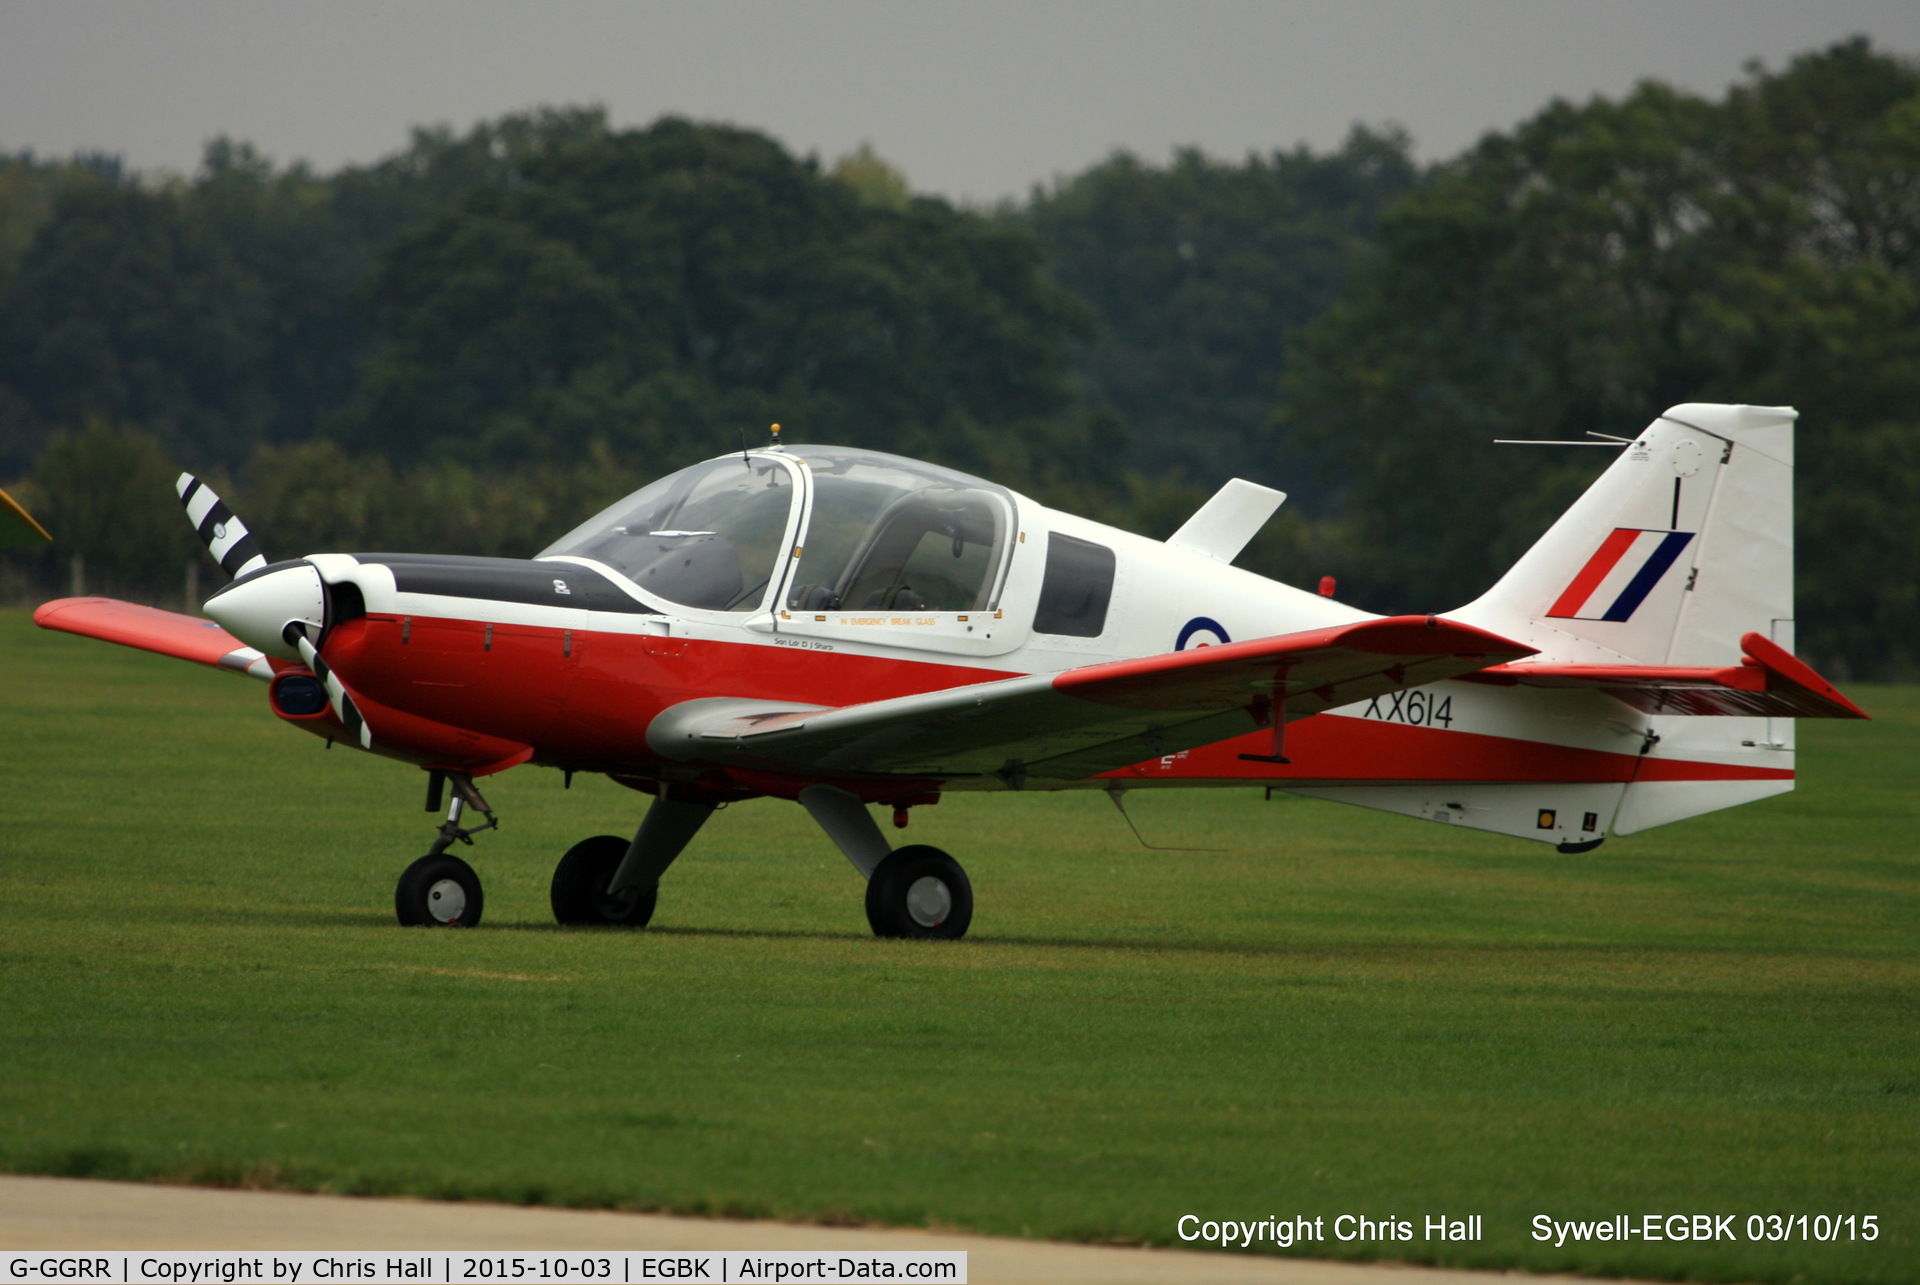 G-GGRR, 1974 Scottish Aviation Bulldog T.1 C/N BH120/272, at The Radial And Training Aircraft Fly-in